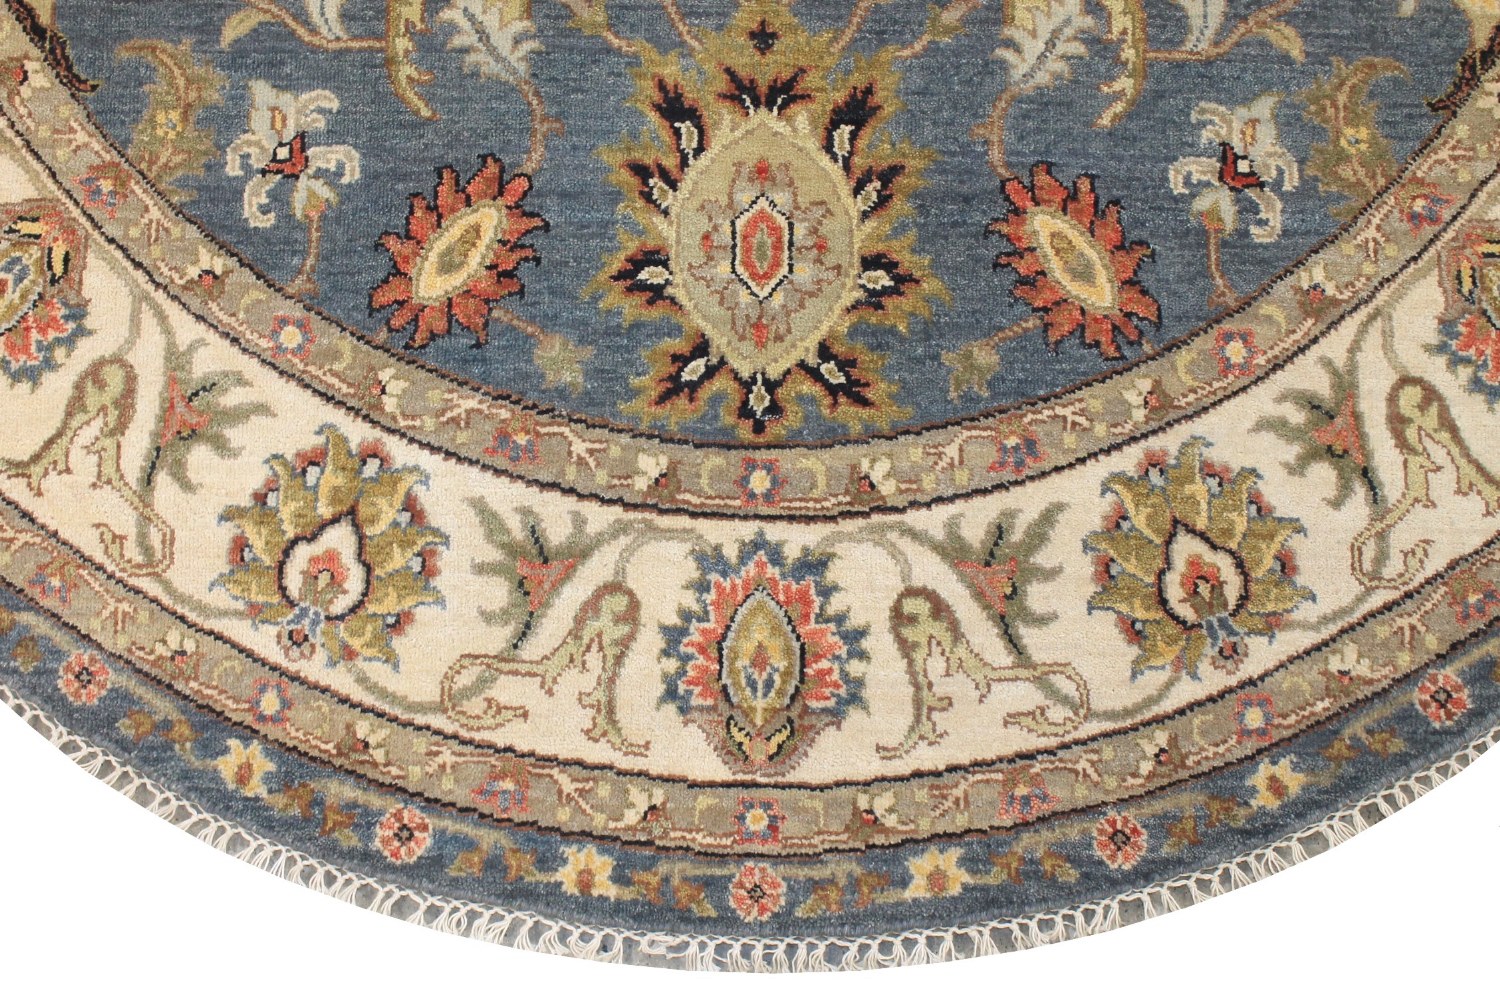 6 ft. - 7 ft. Round & Square Traditional Hand Knotted Wool Area Rug - MR027063